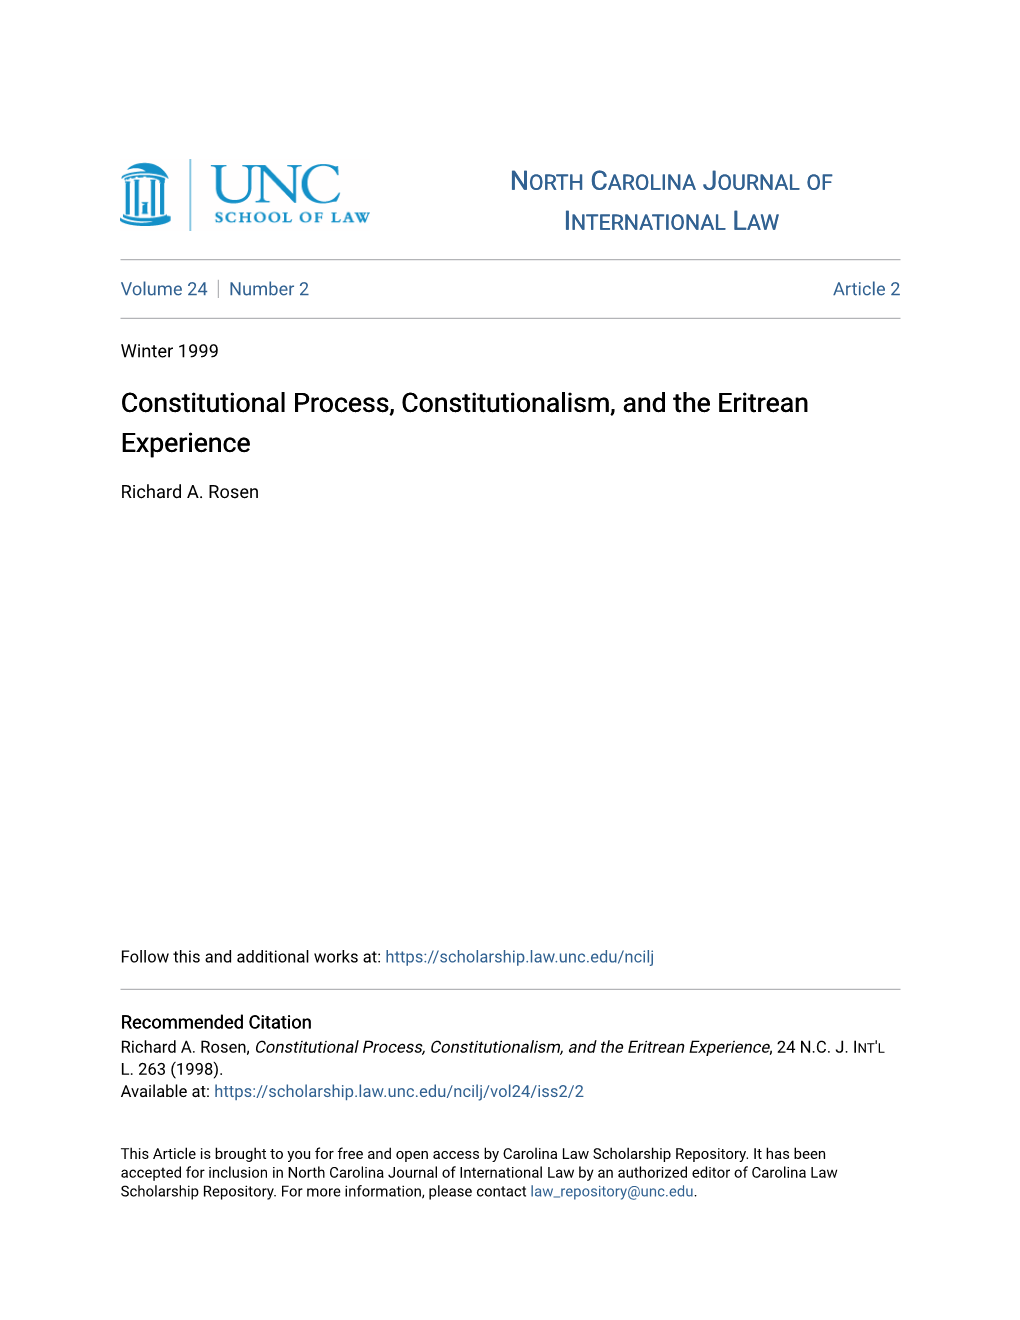 Constitutional Process, Constitutionalism, and the Eritrean Experience